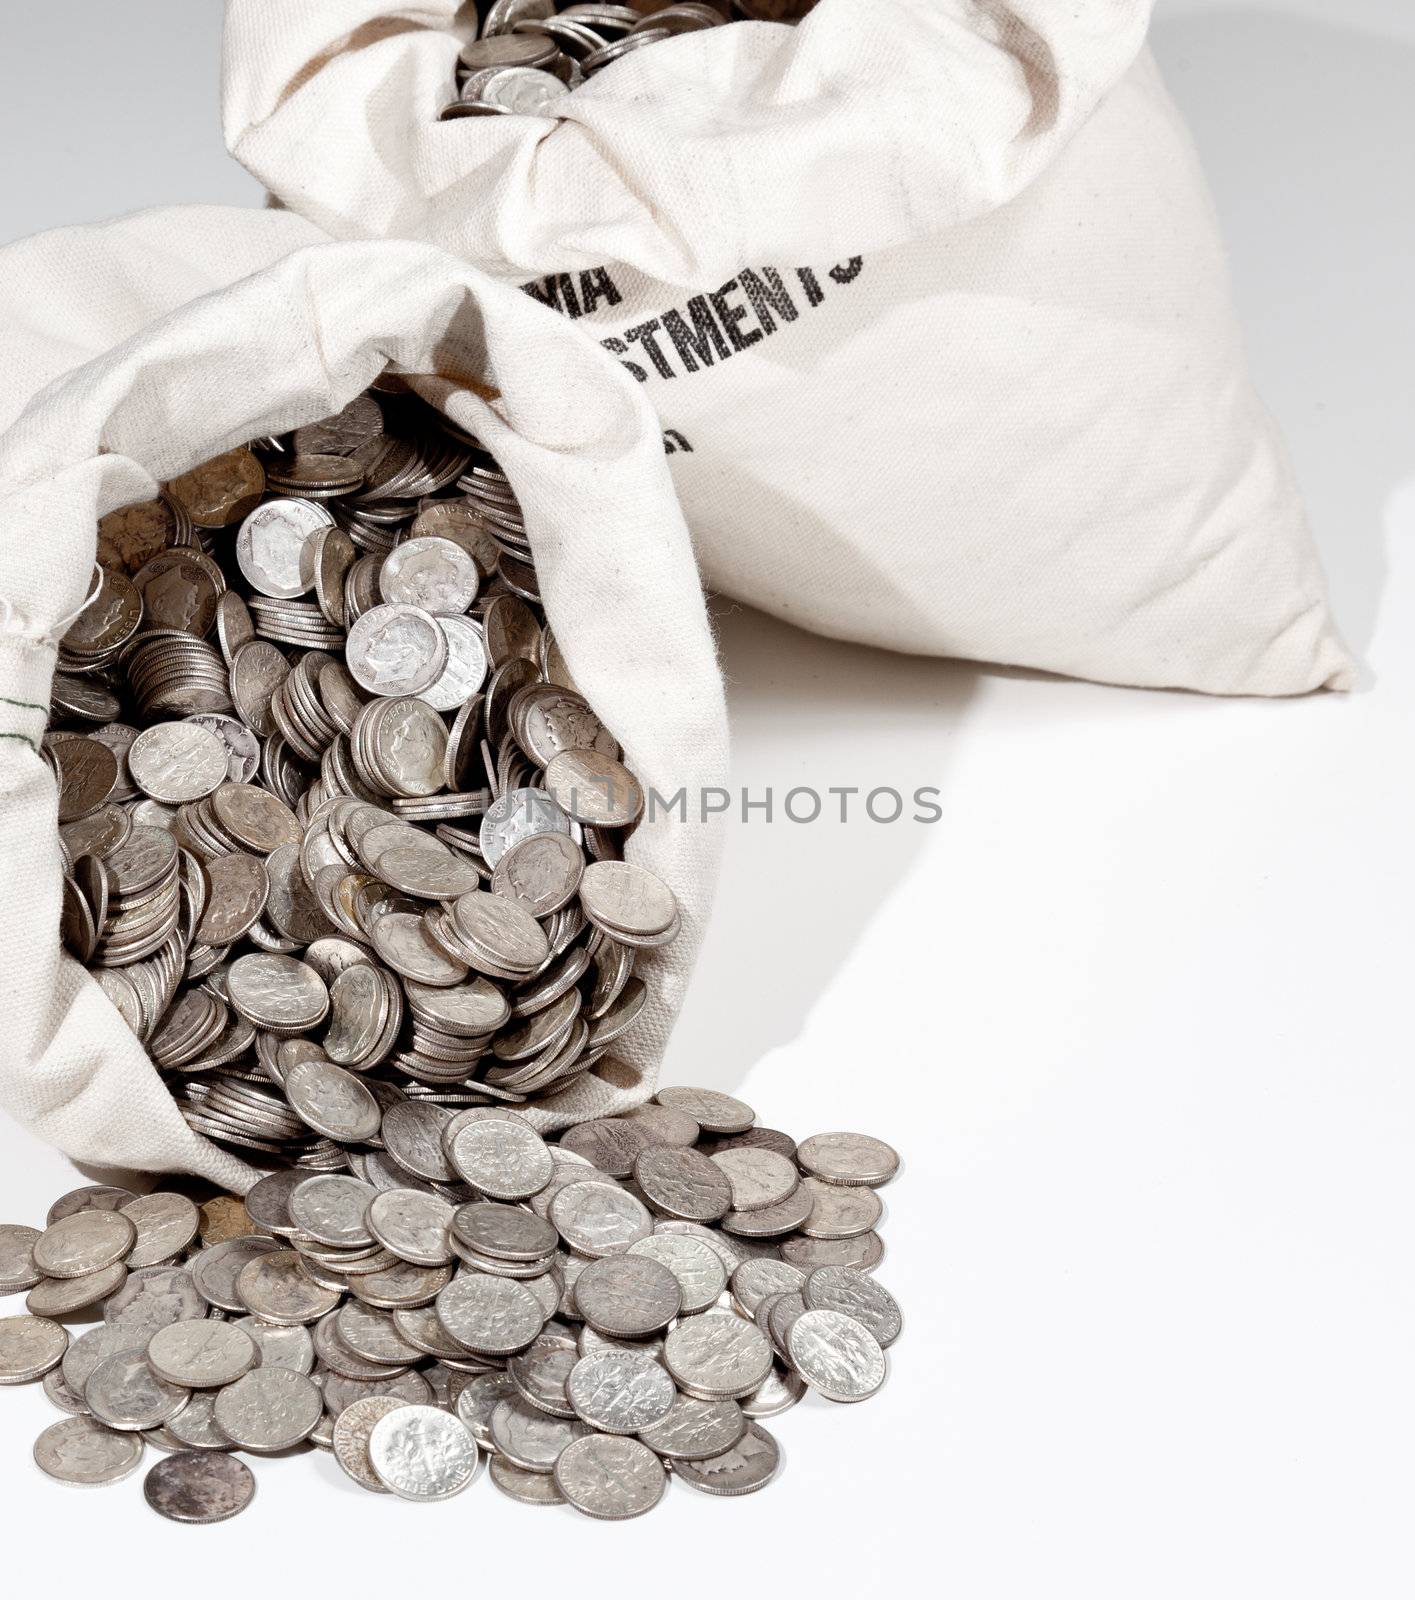 Linen bag of old pure silver coins used to invest in silver as a commodity